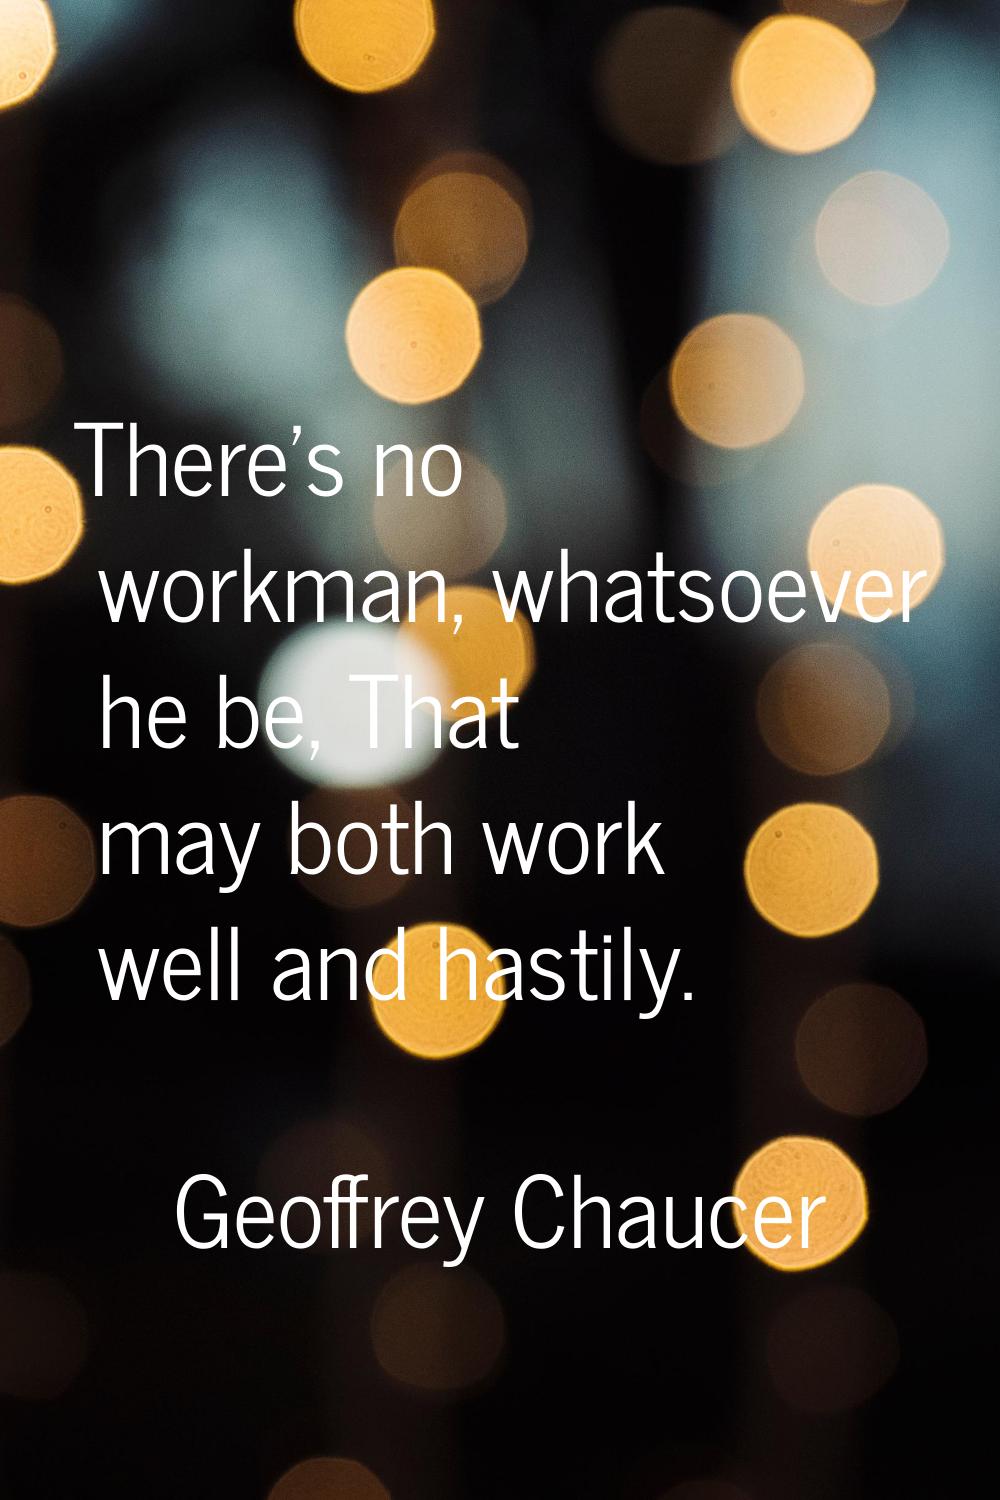 There's no workman, whatsoever he be, That may both work well and hastily.